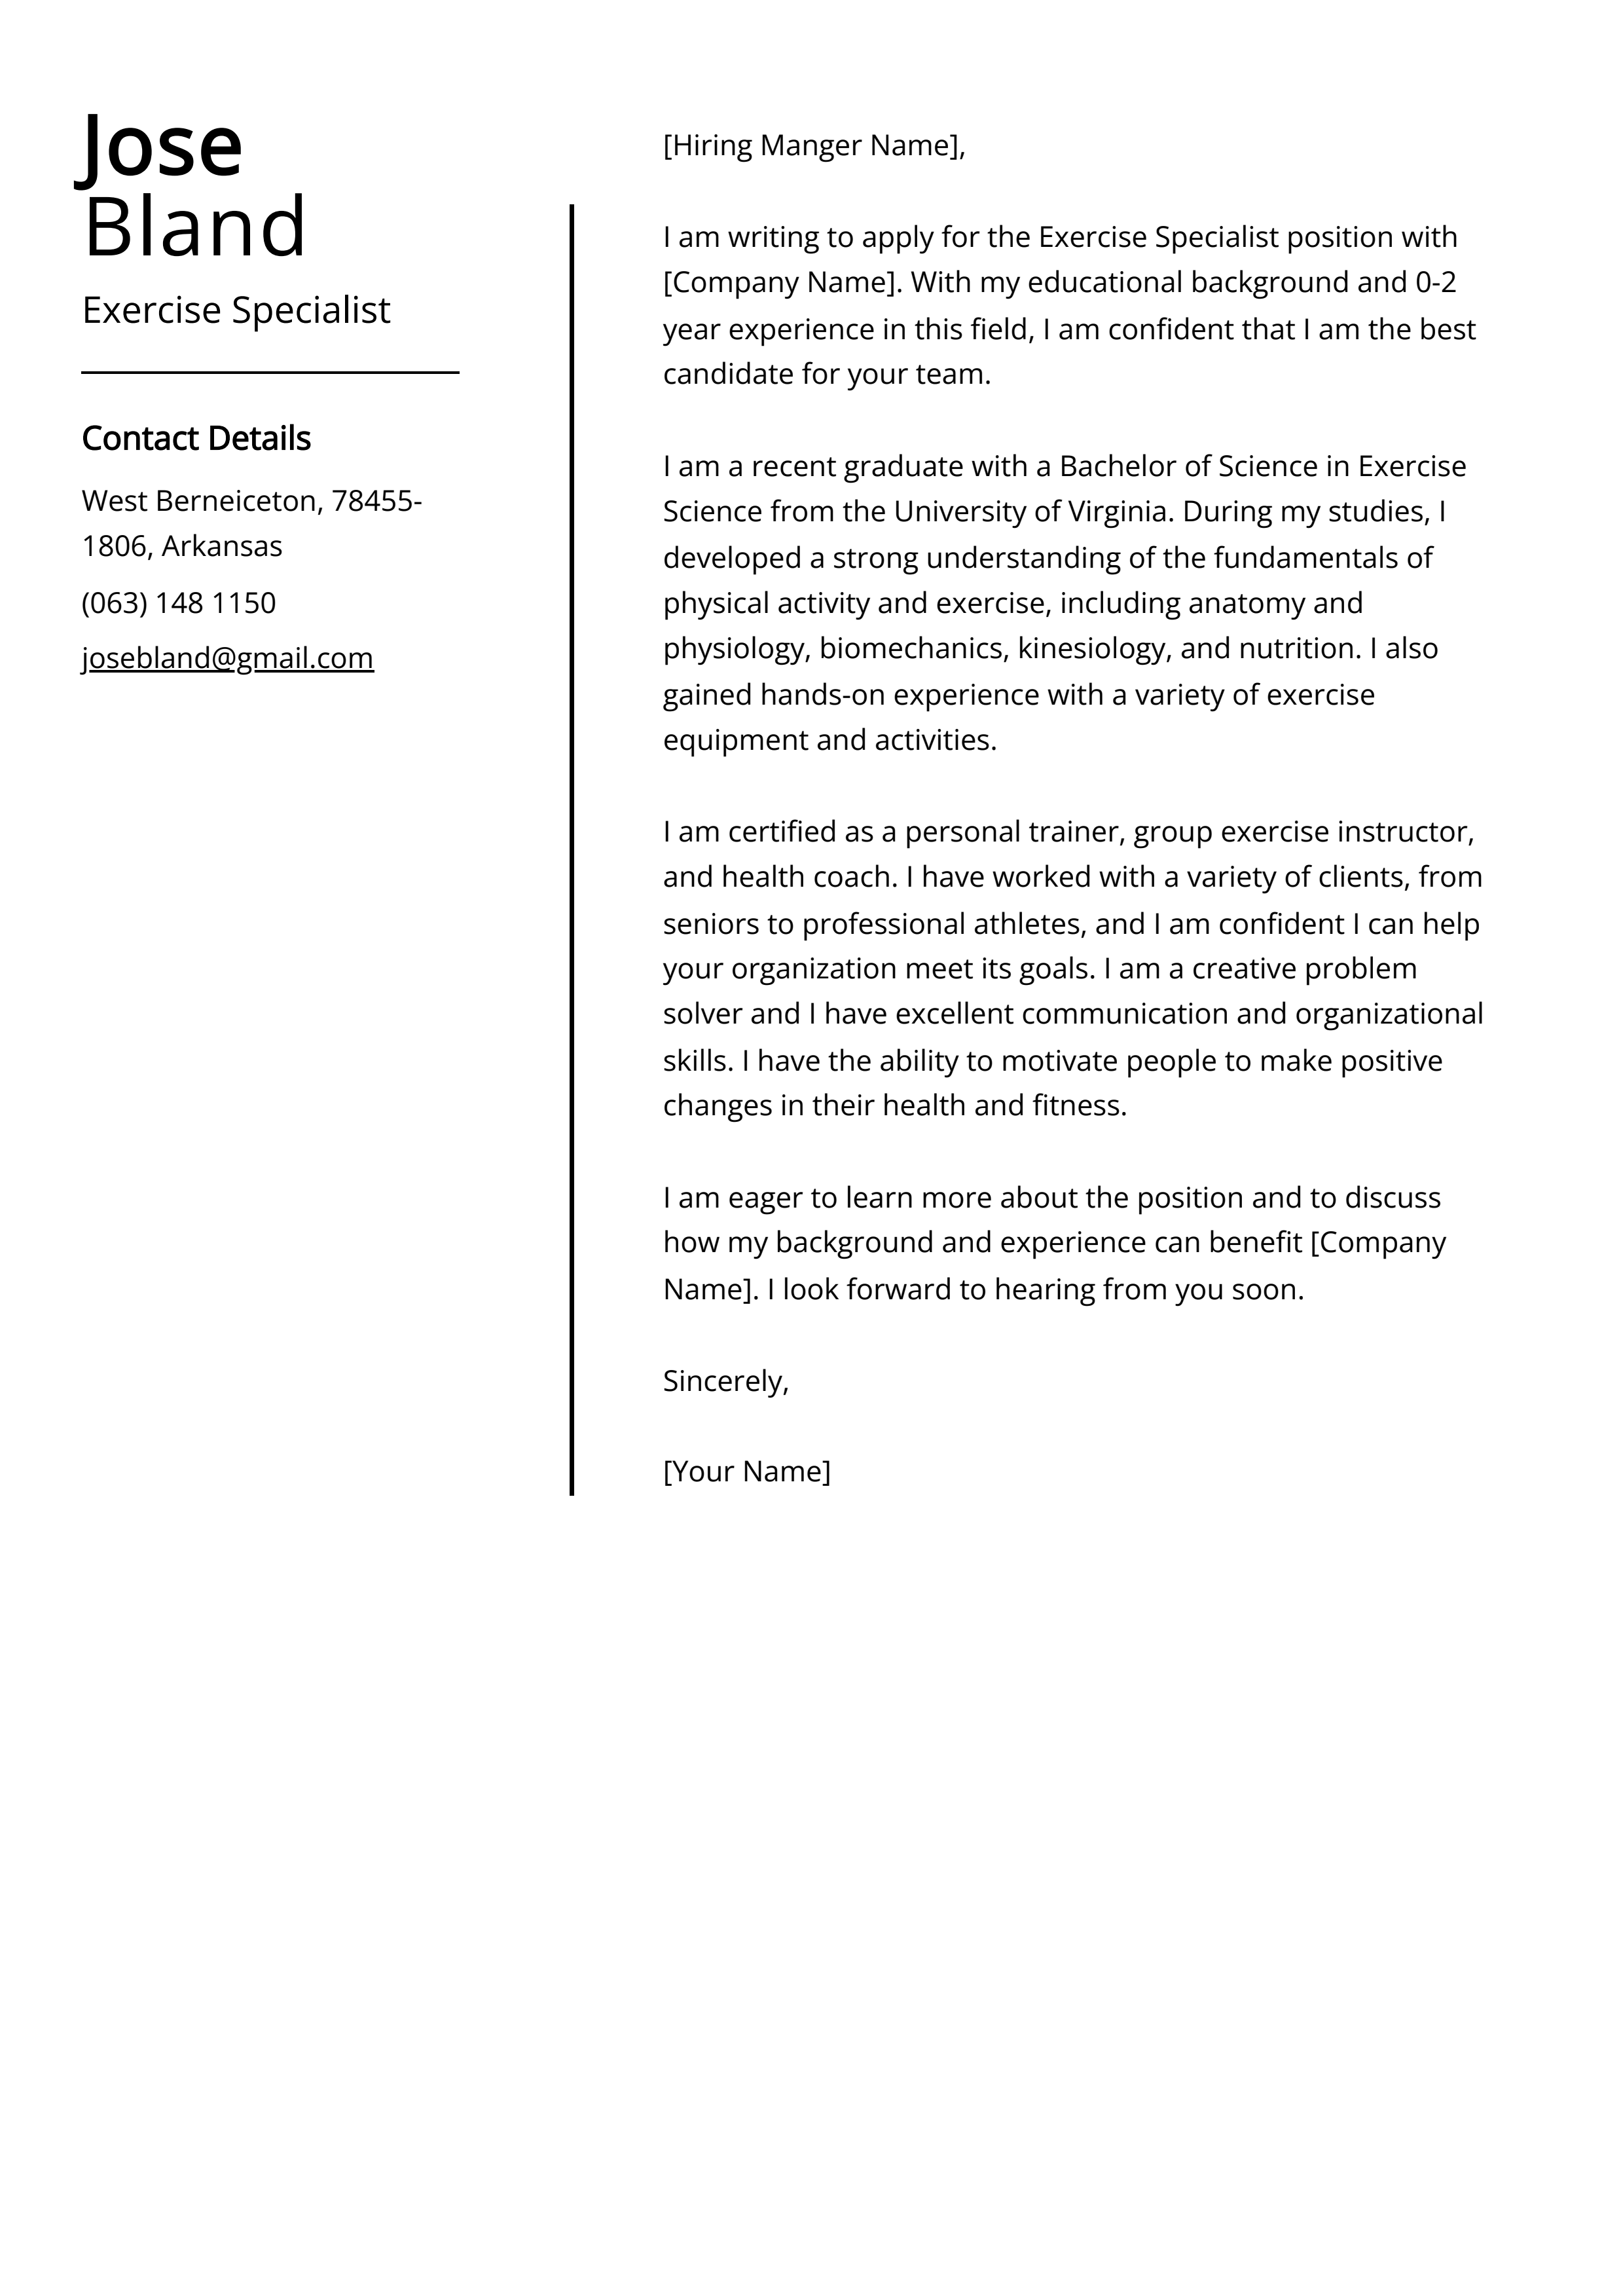 Exercise Specialist Cover Letter Example